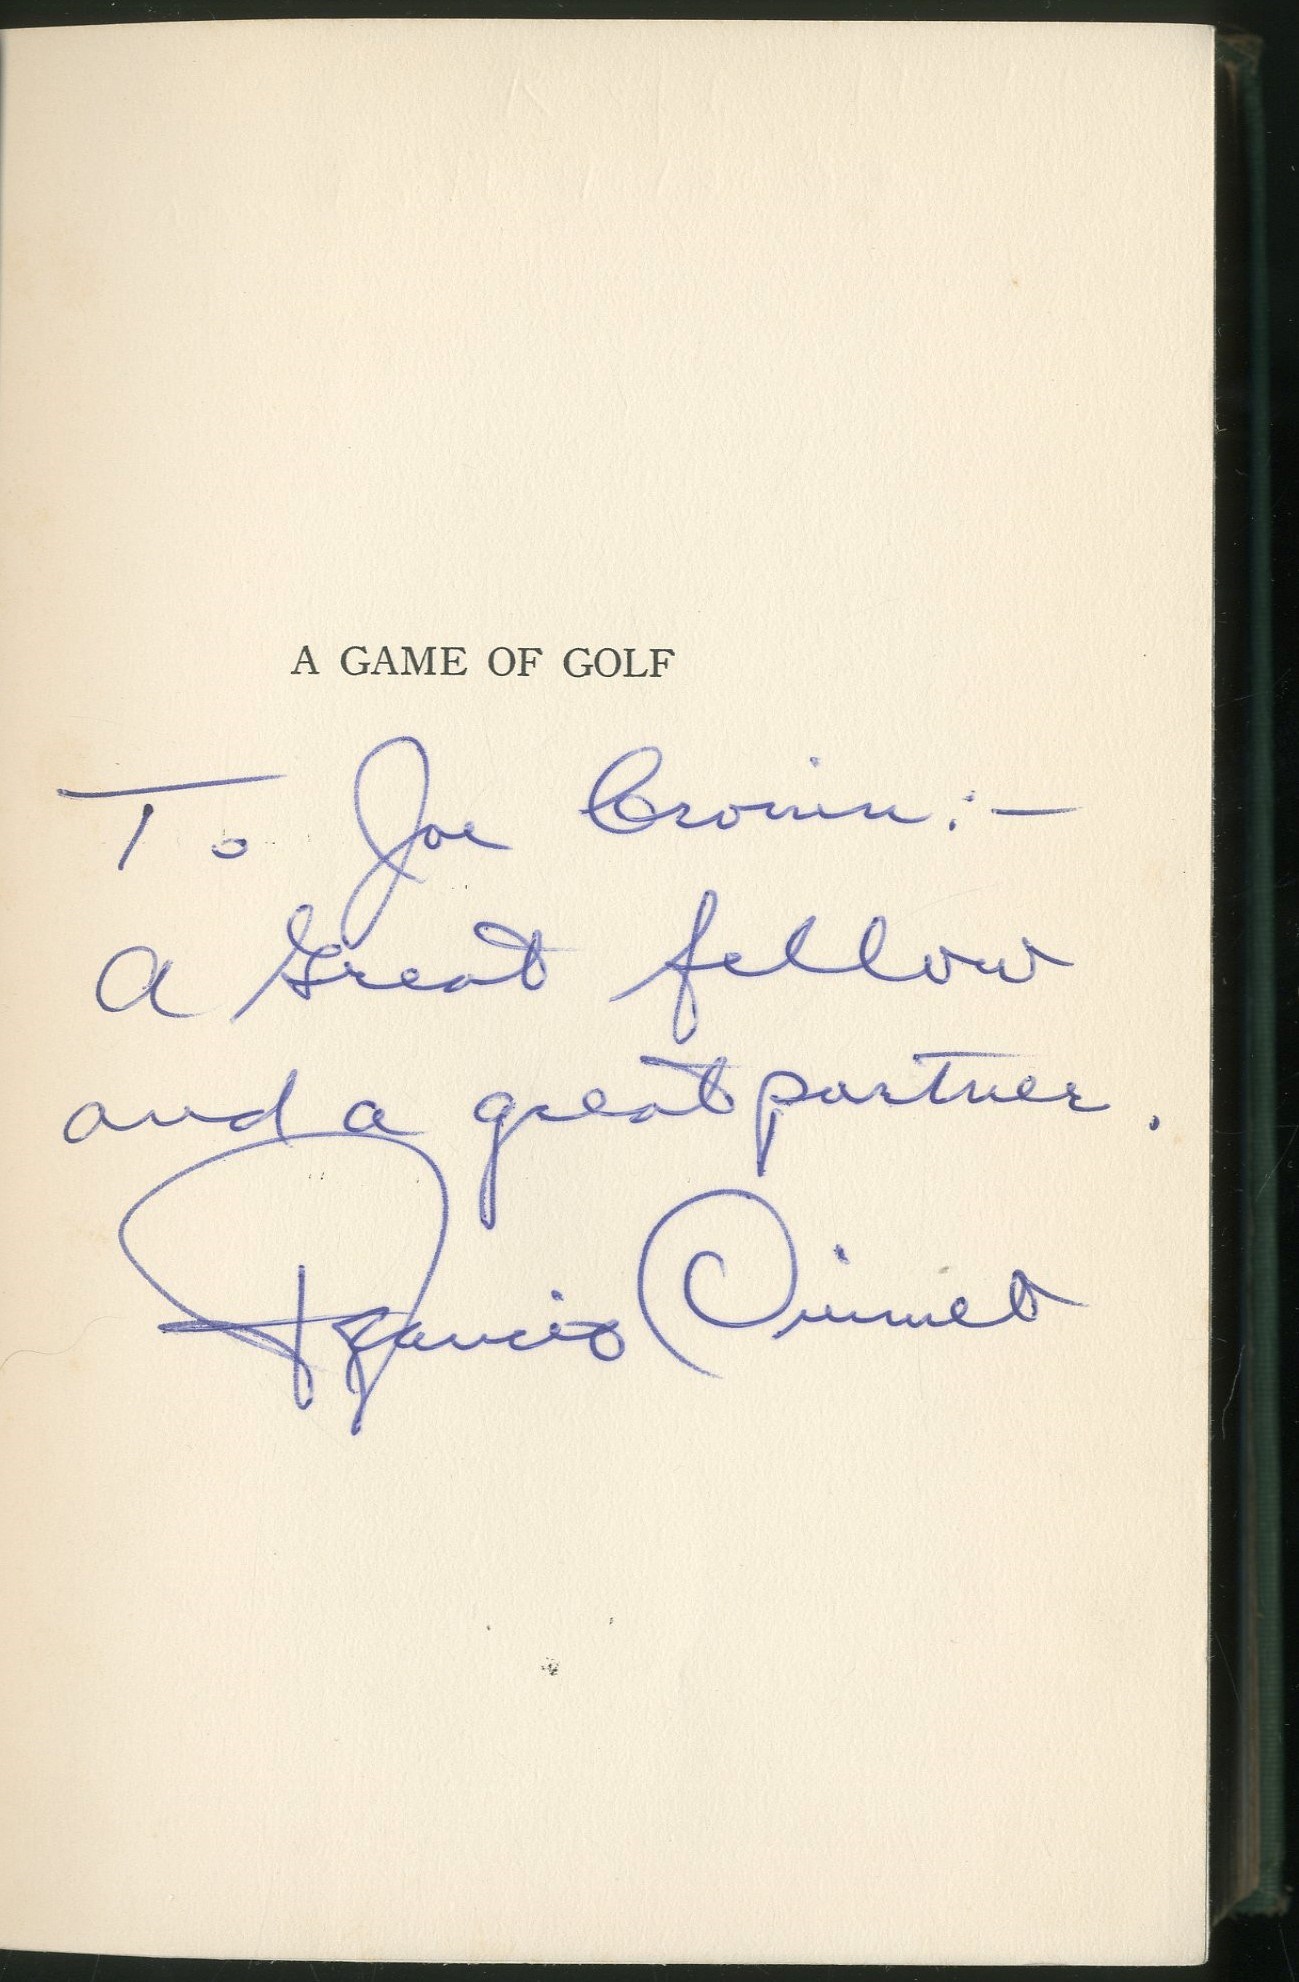 Boston Sports - 1932 "A Game of Golf" Book Signed by Francis Ouimet to Joe Cronin (PSA & SGC)